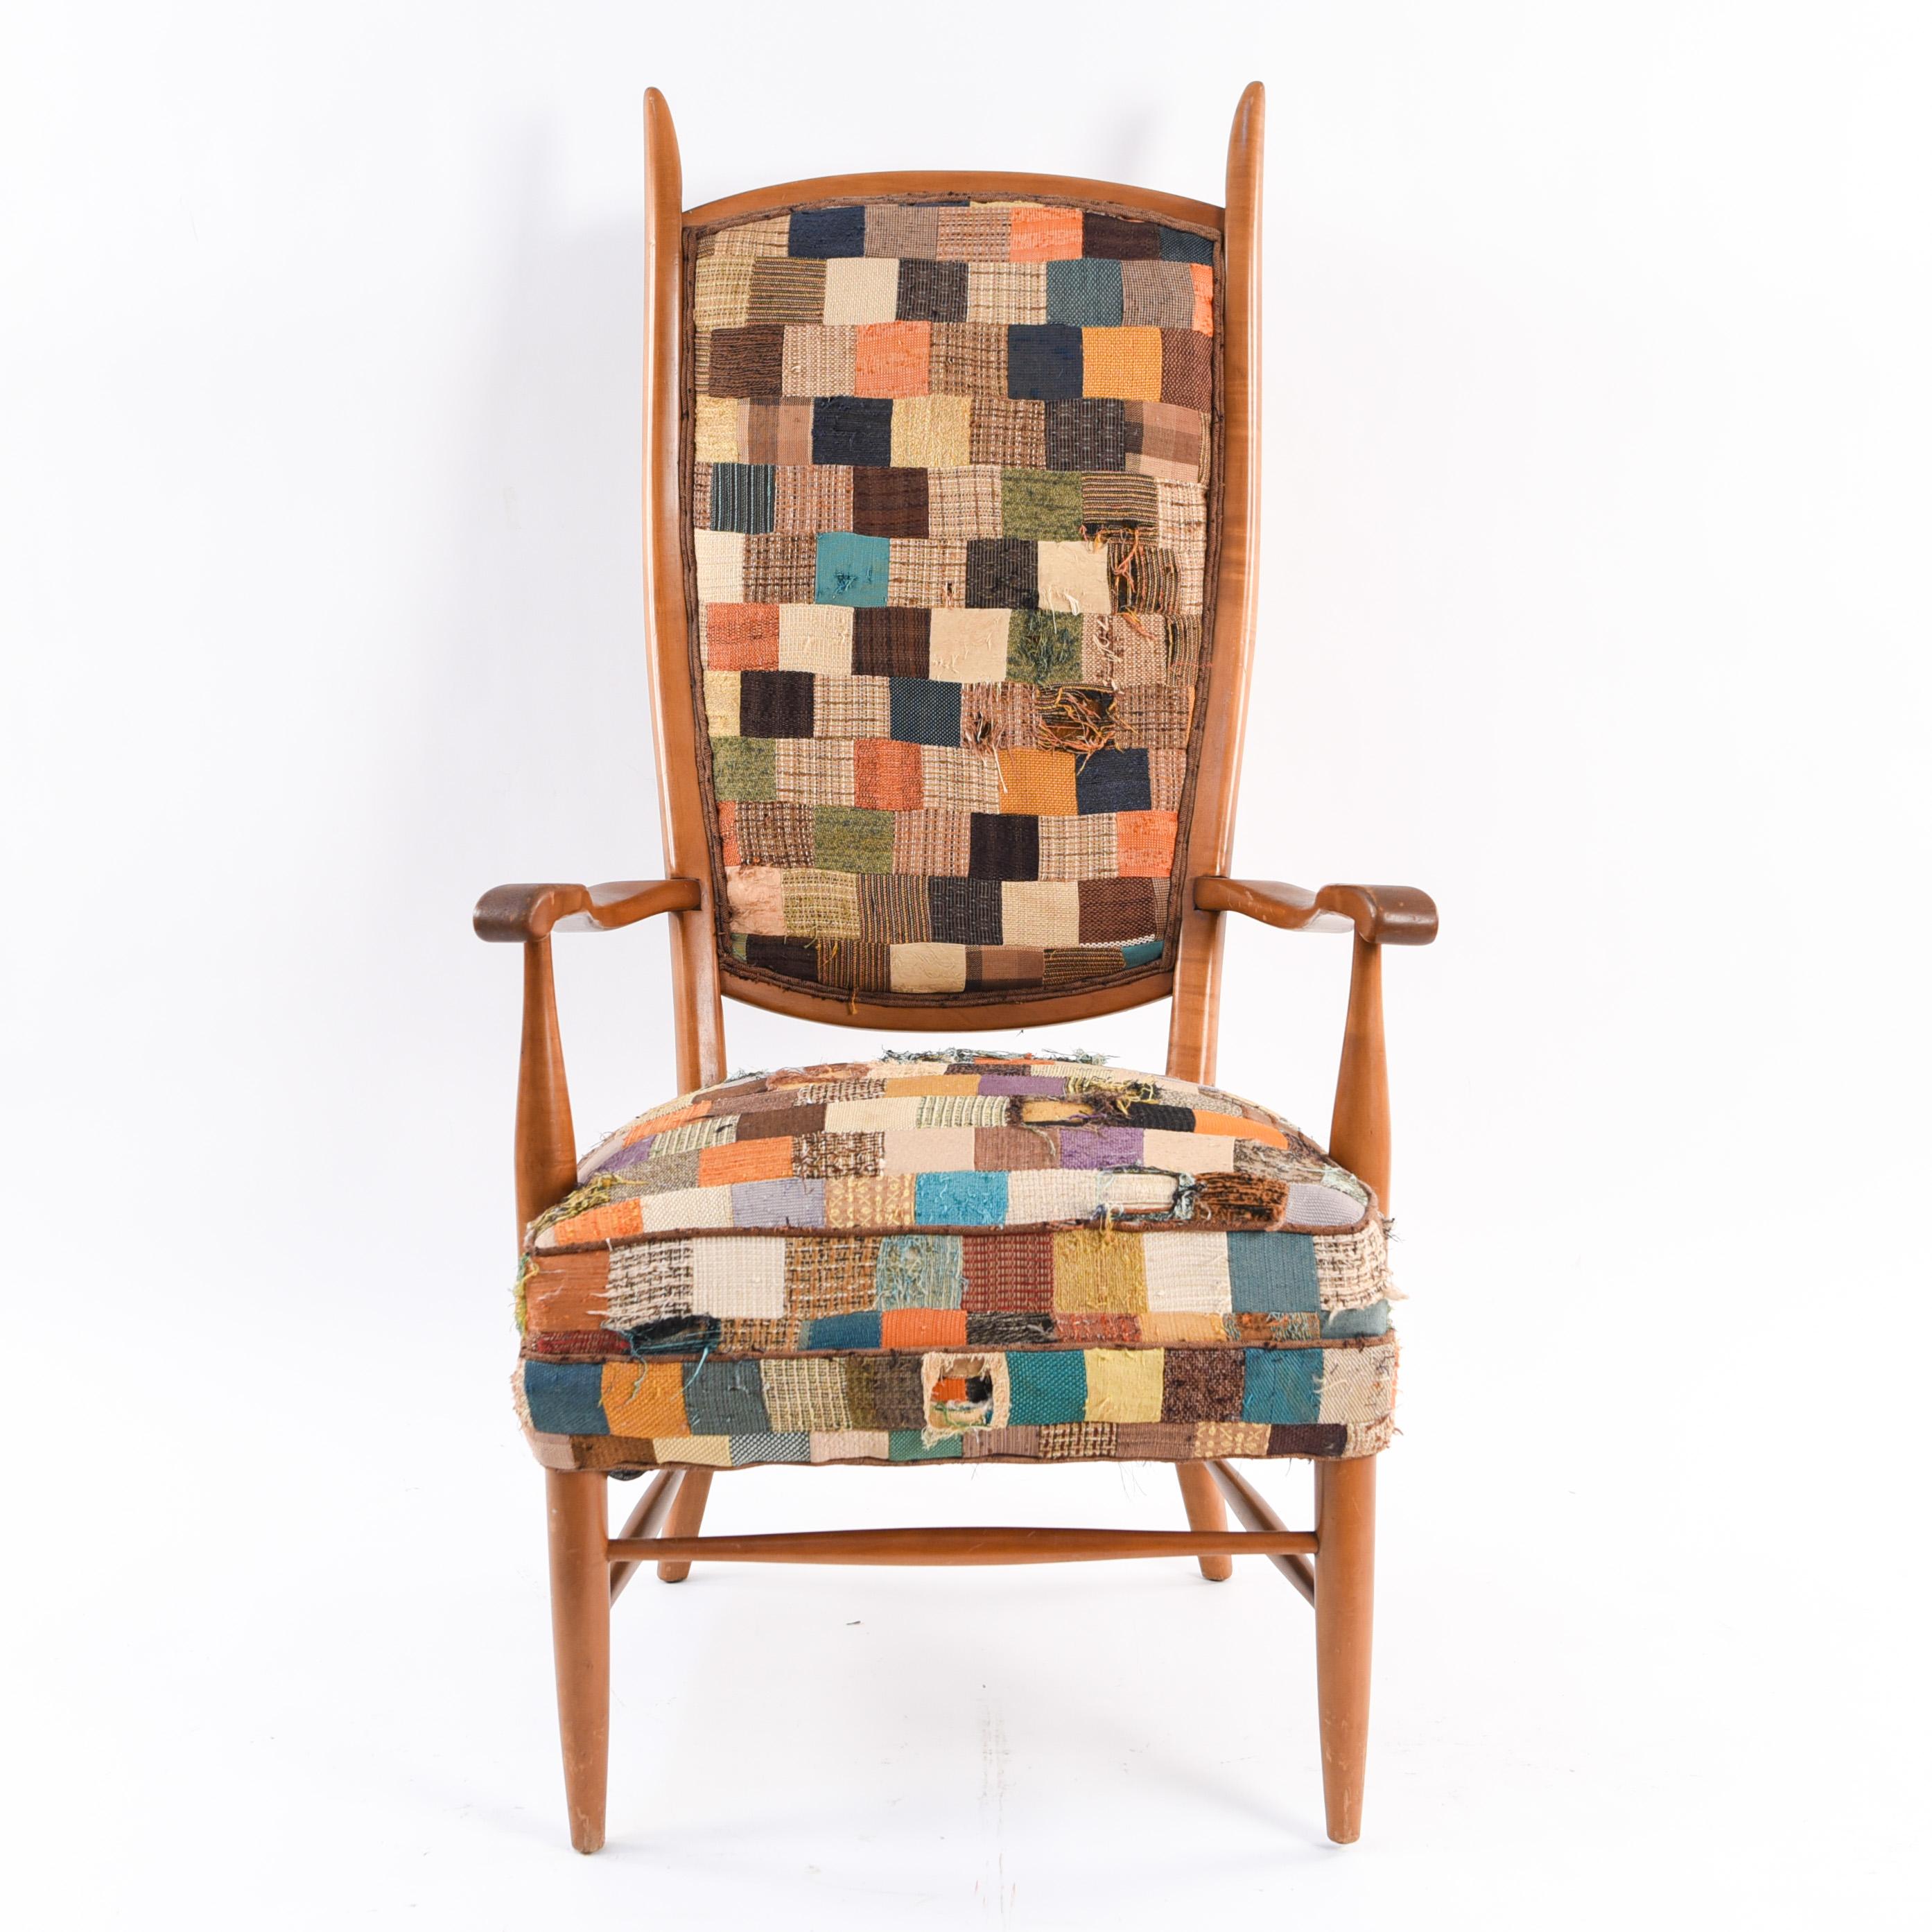 This modern chair has a high back design with interesting lines in the frame. With unique patchwork upholstery.